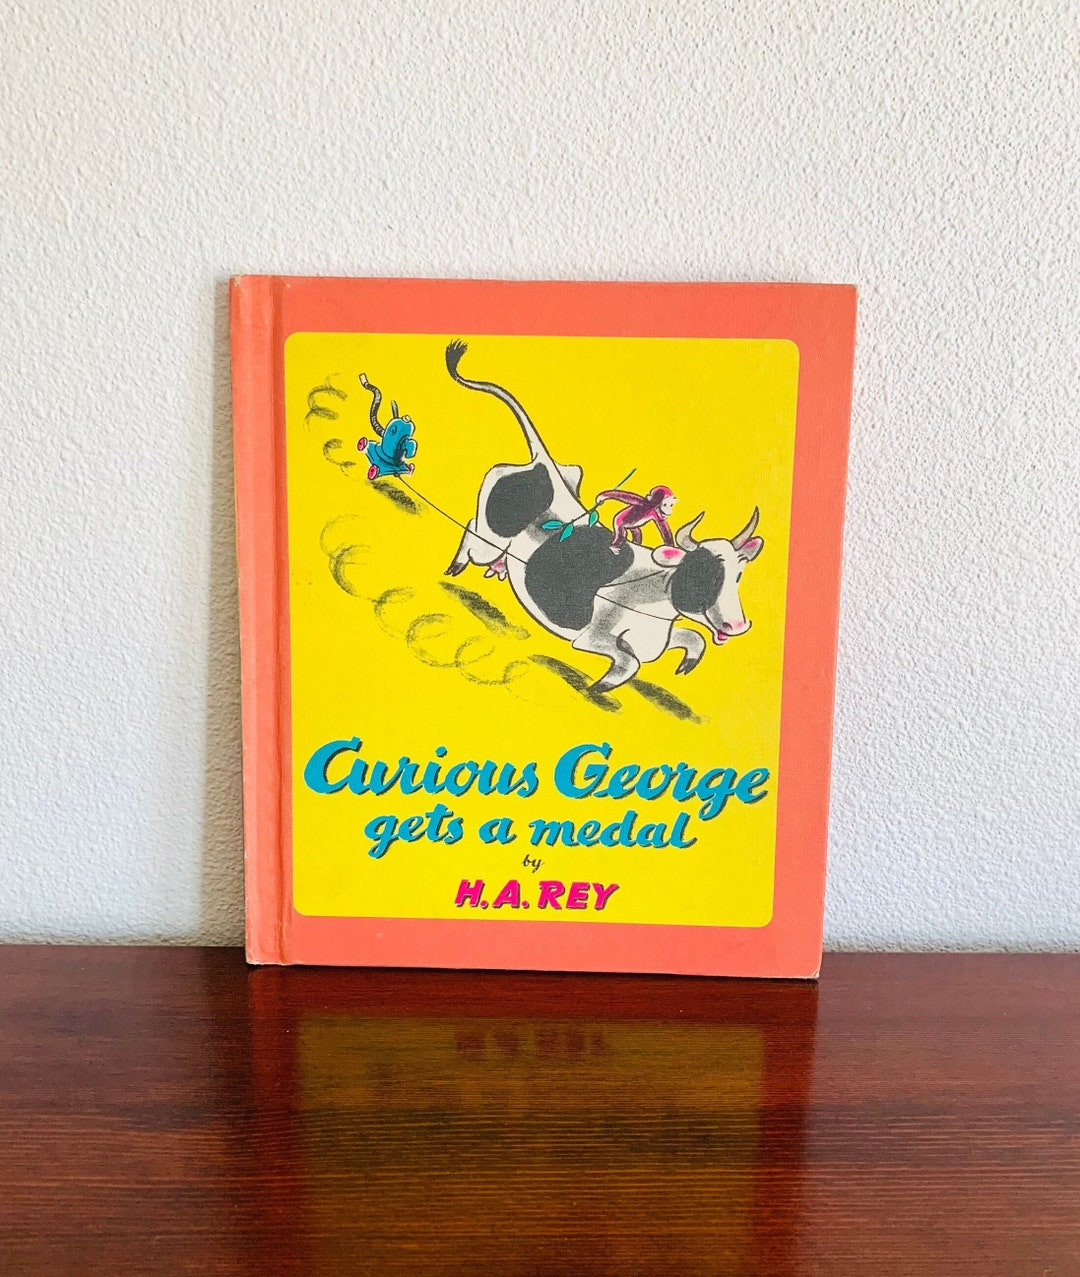 Curious　Hardcover　by　1957　Etsy　Rey　Gets　Medal　A　George　Vintage